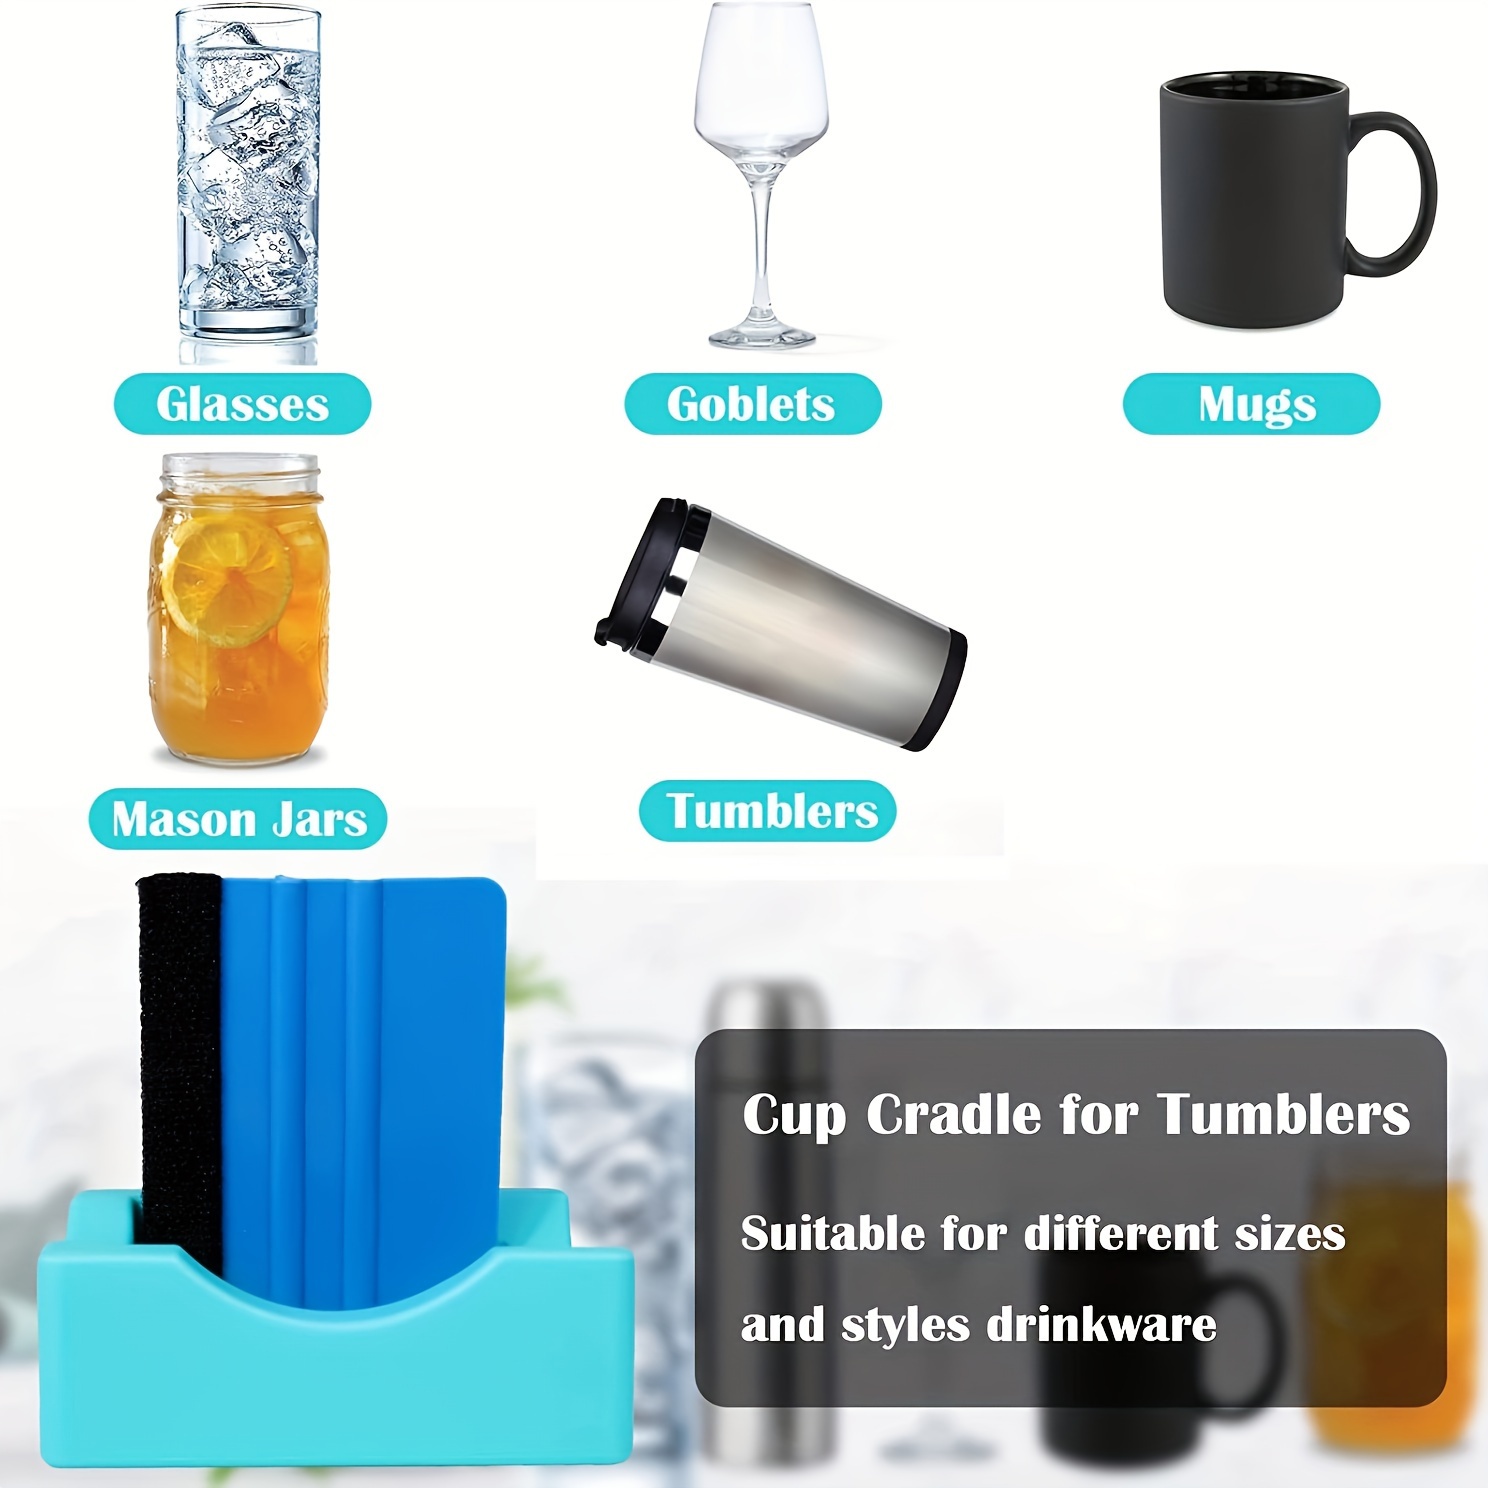 CUPITUP Small Silicone Cup Cradle with Built-in Slot for Crafting Tumblers  Use to Apply Vinyl Decals for Tumblers, Tumbler Holder for Crafts, 2 Angle  Supports Tumbler Cradle for Epoxy